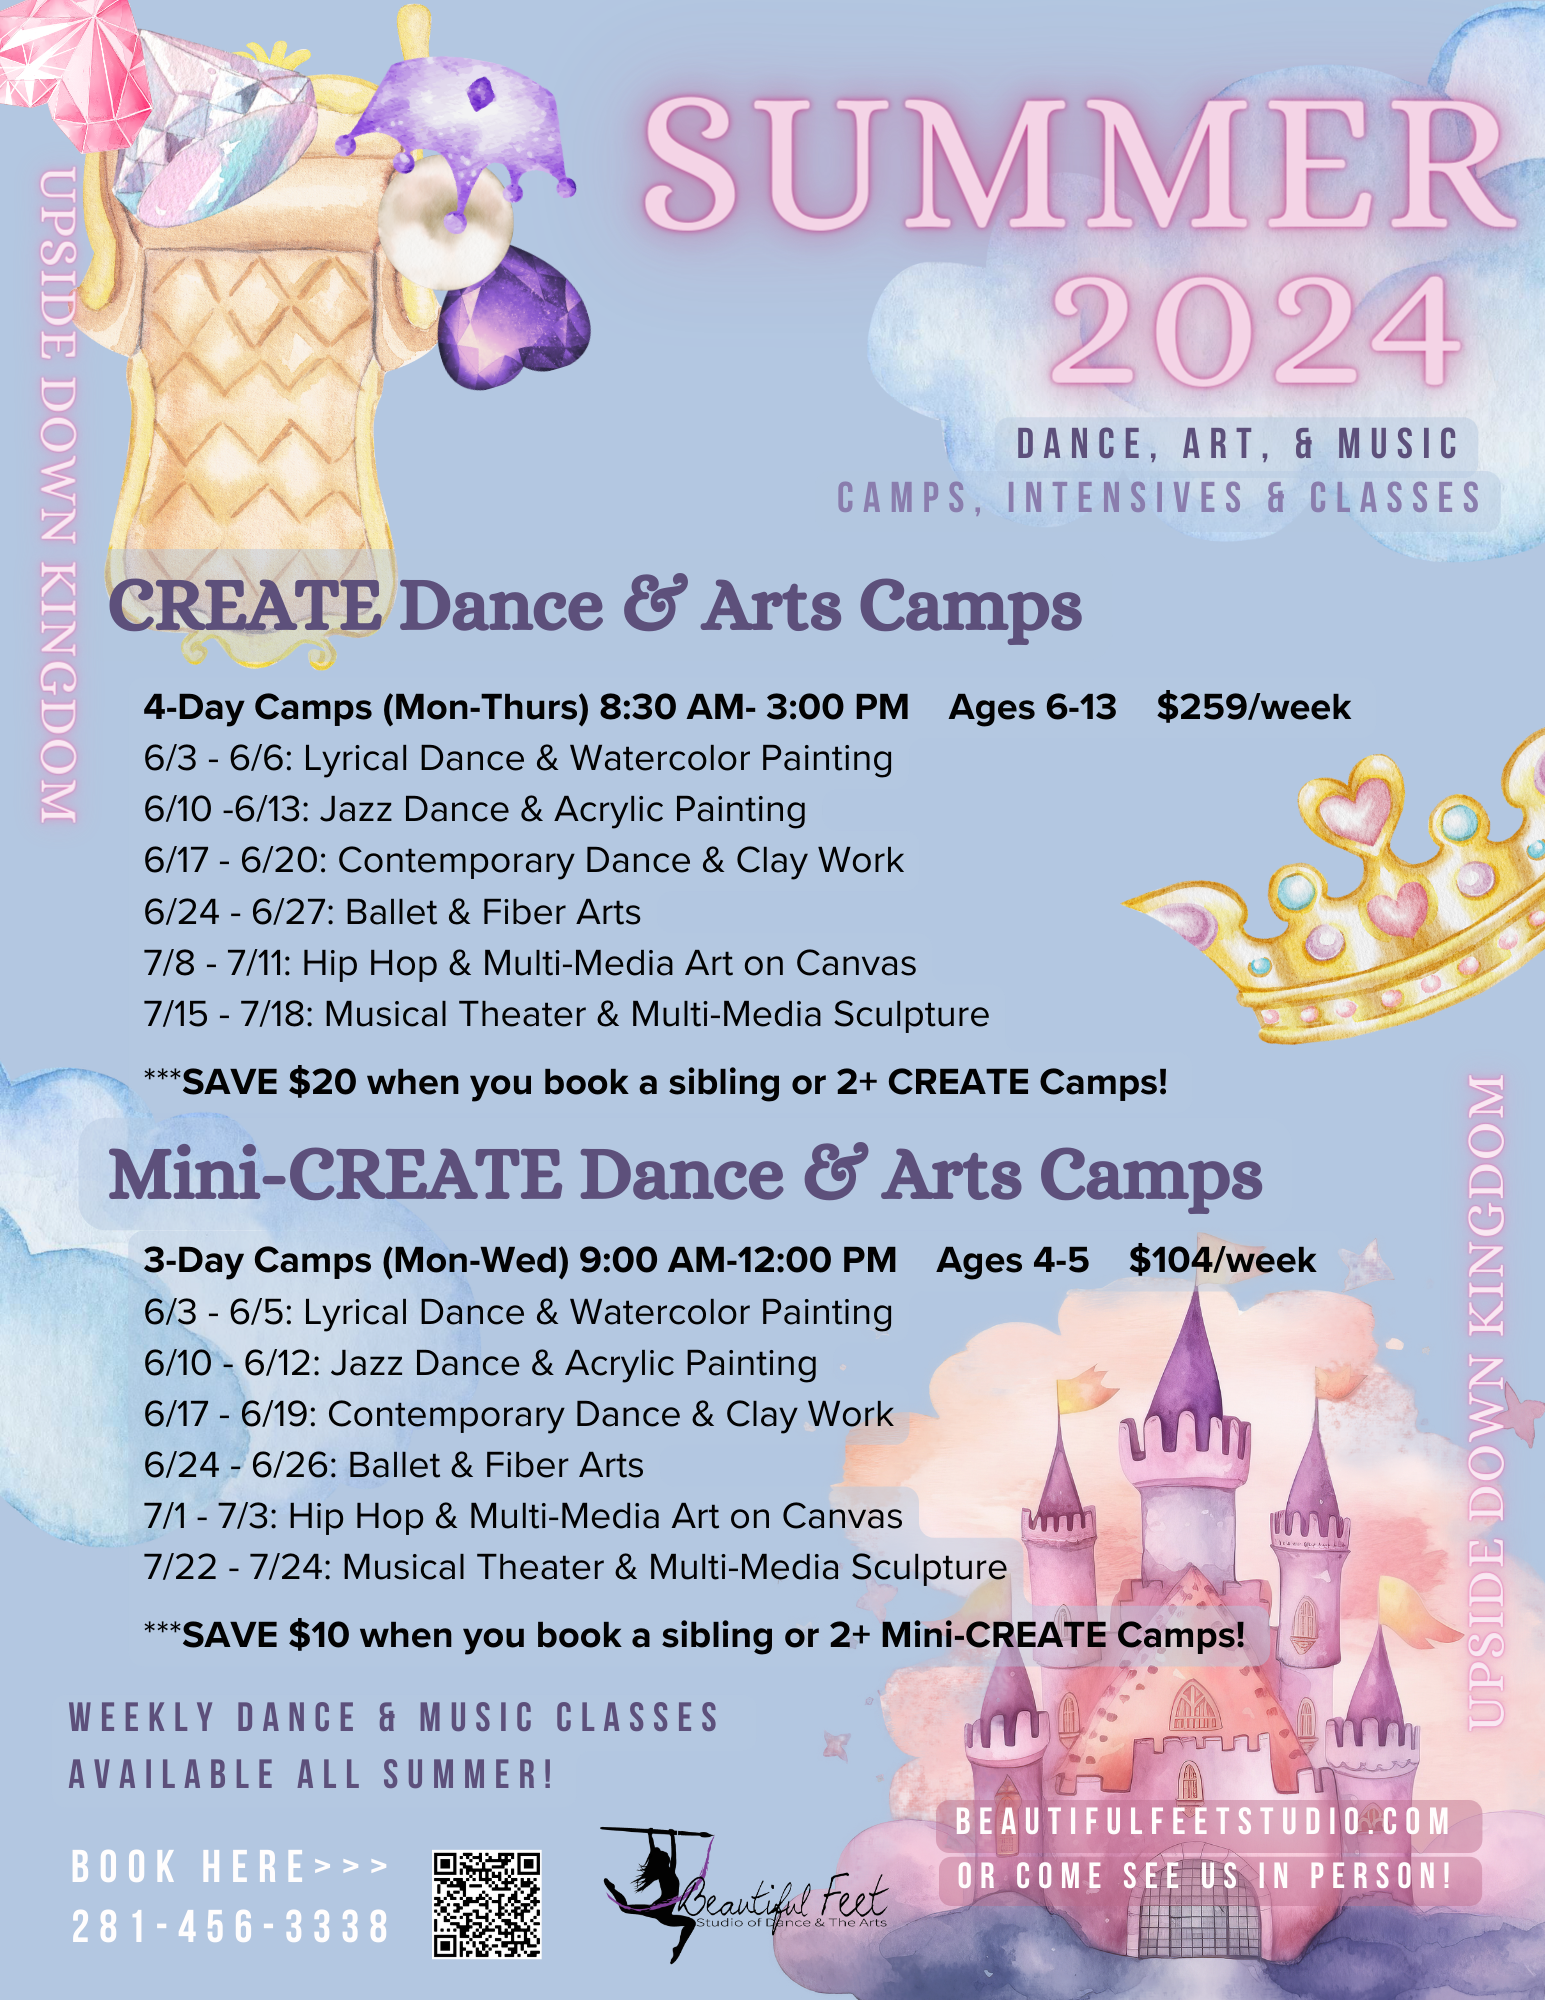 4-Day CREATE Camp – Lyrical Dance & Watercolor Painting (Ages 6-13)